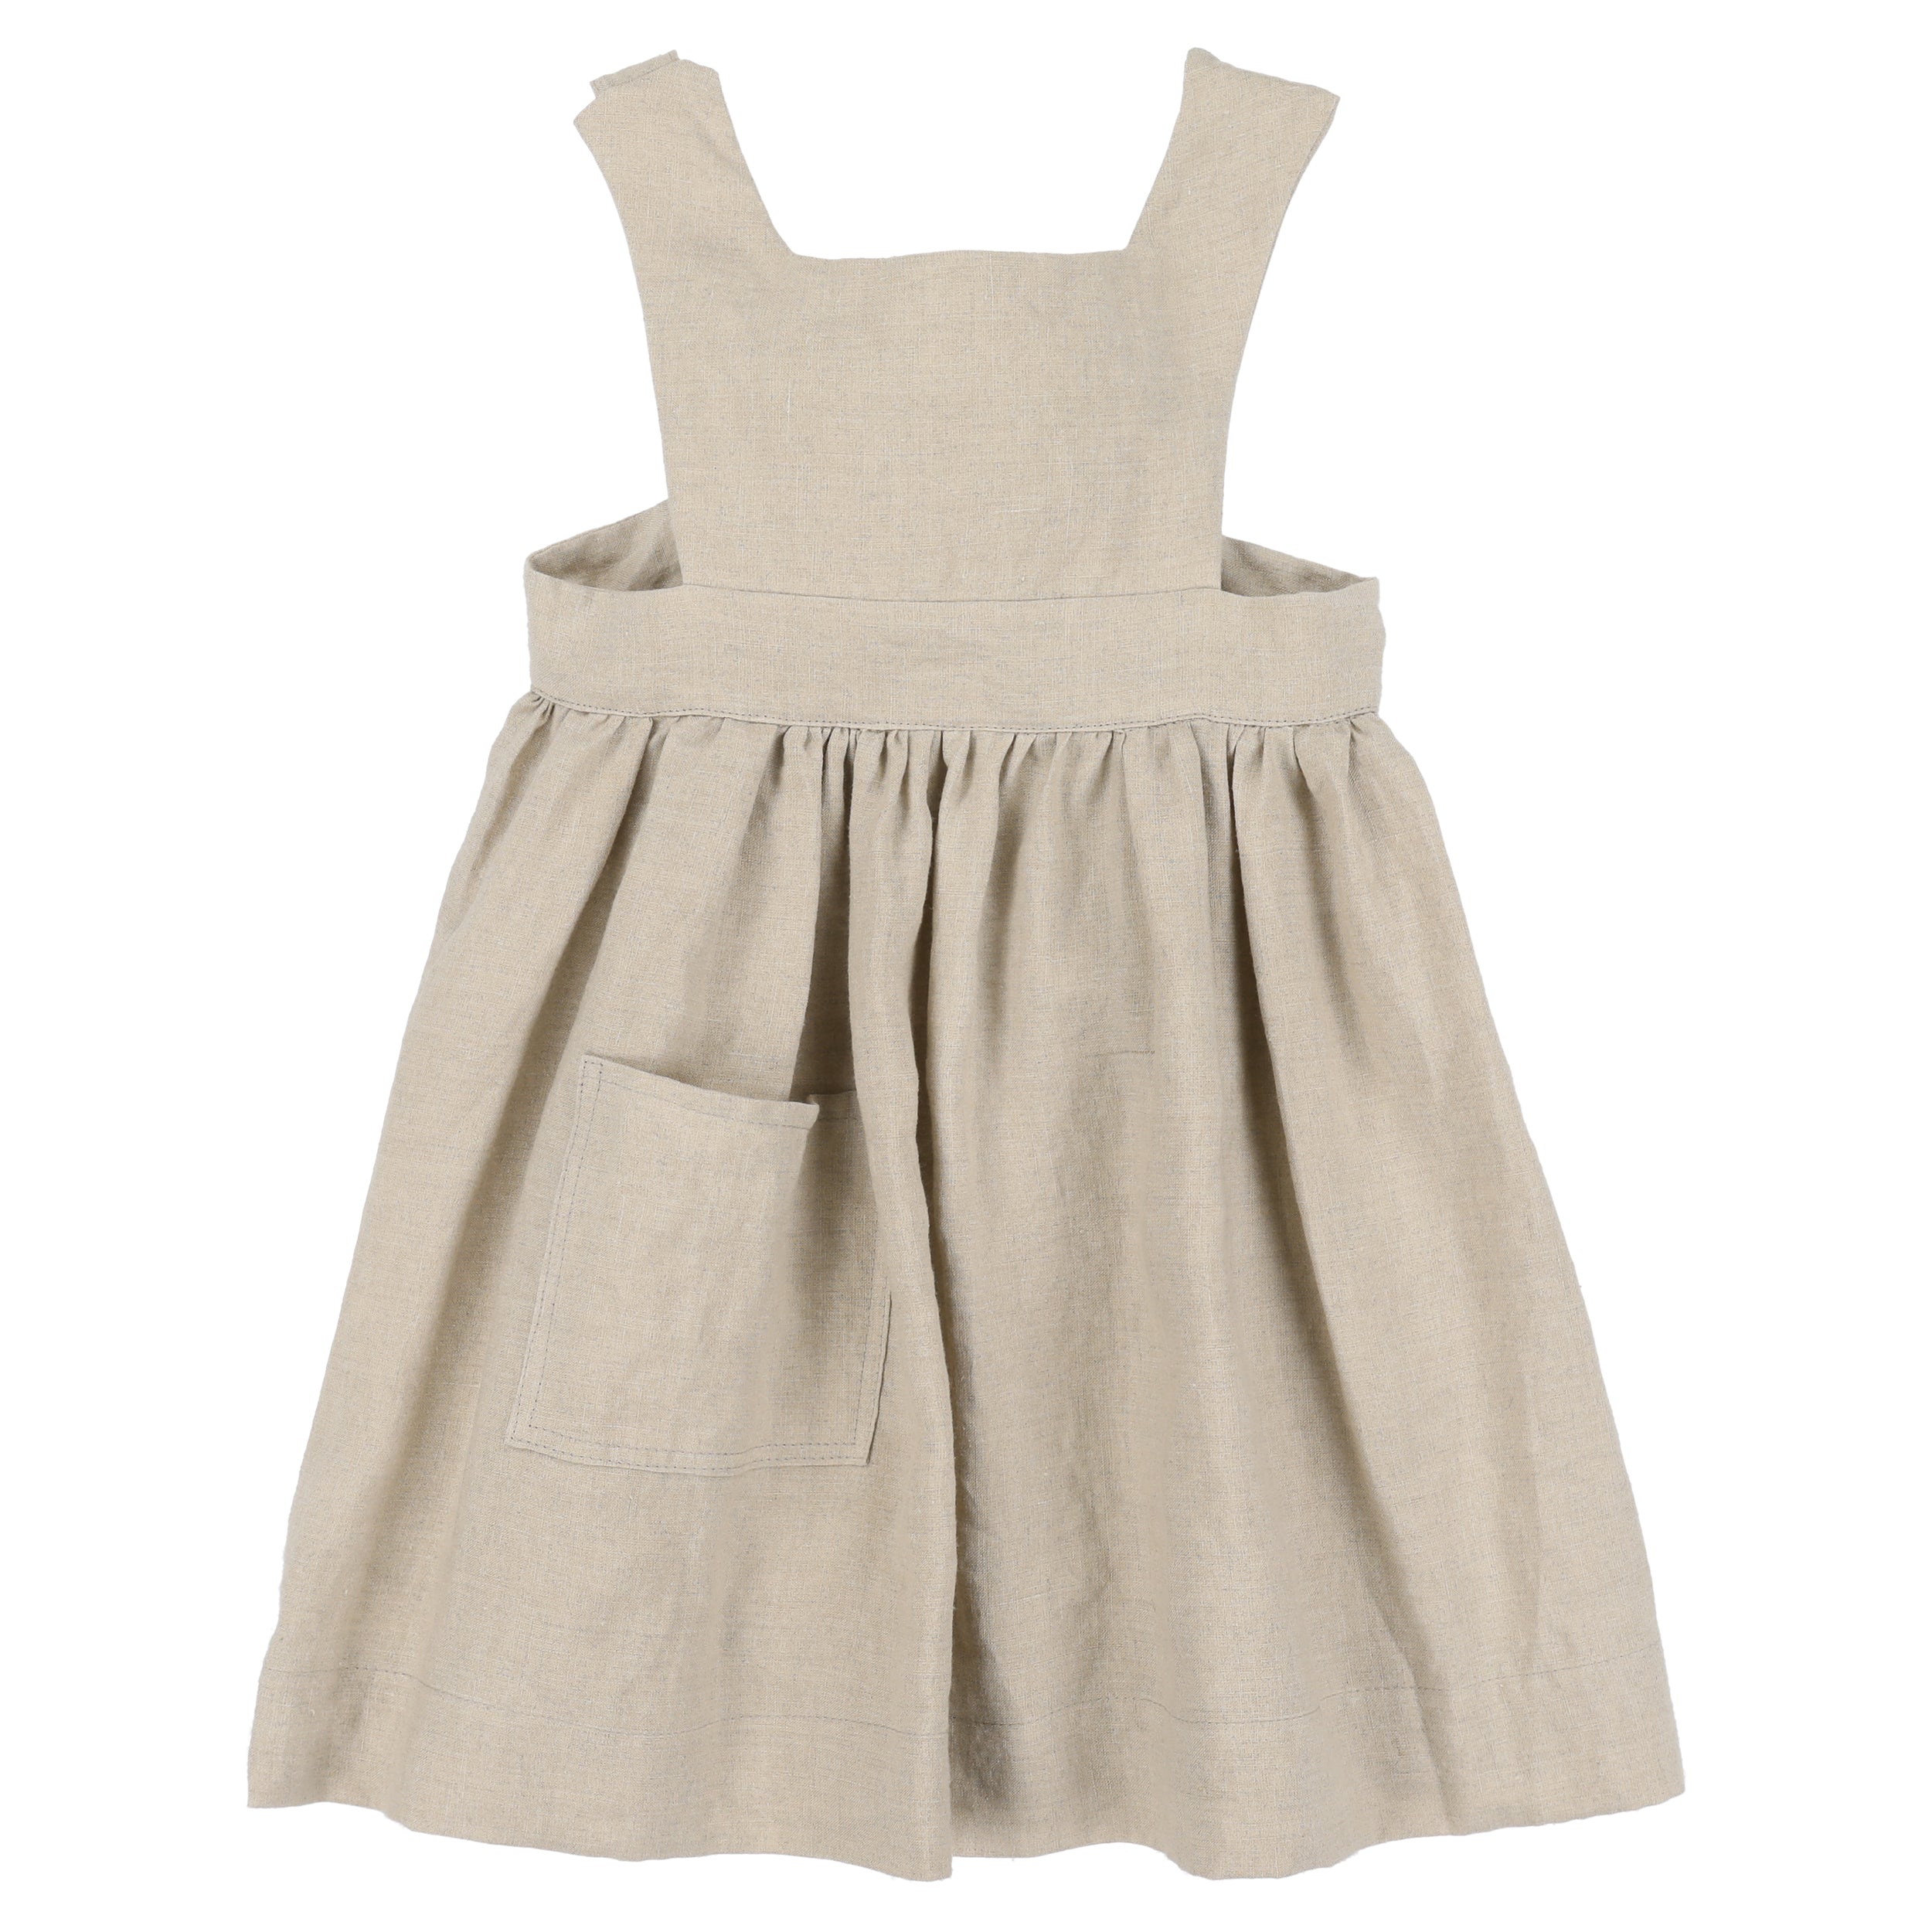 Carrier Company Child's Pinafore in Unbleached Linen